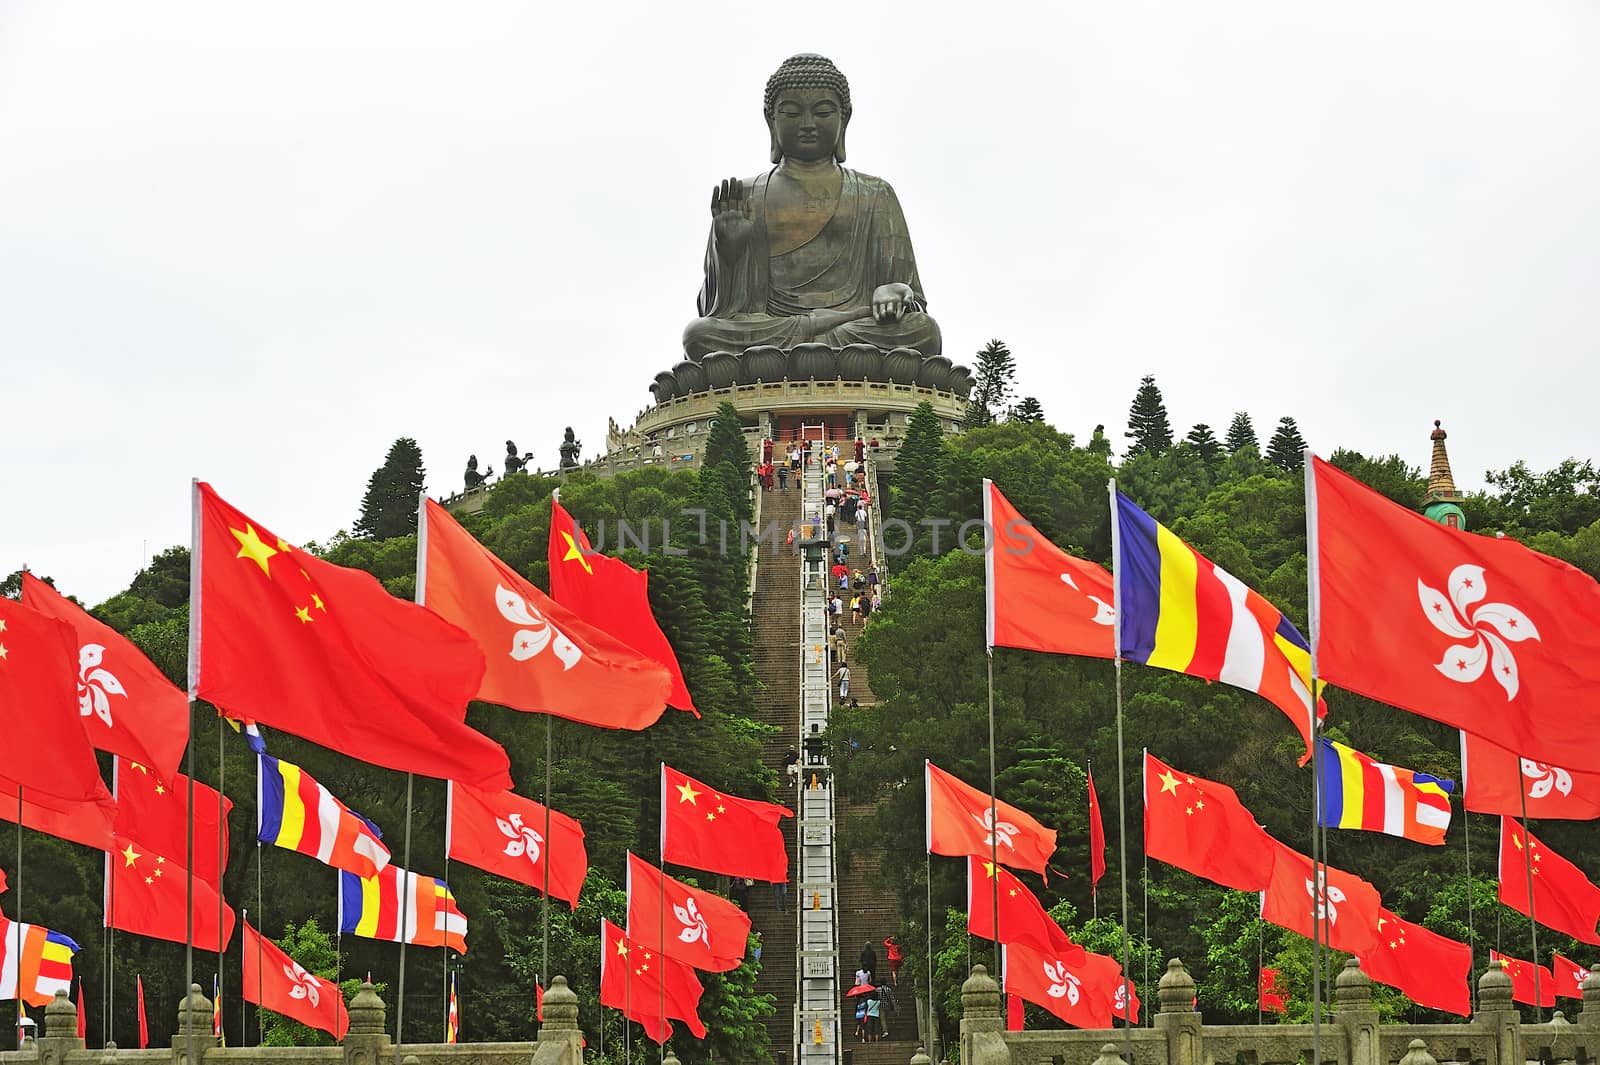 Tian Tan Buddha - The worlds's tallest outdoor seated bronze Bud by think4photop